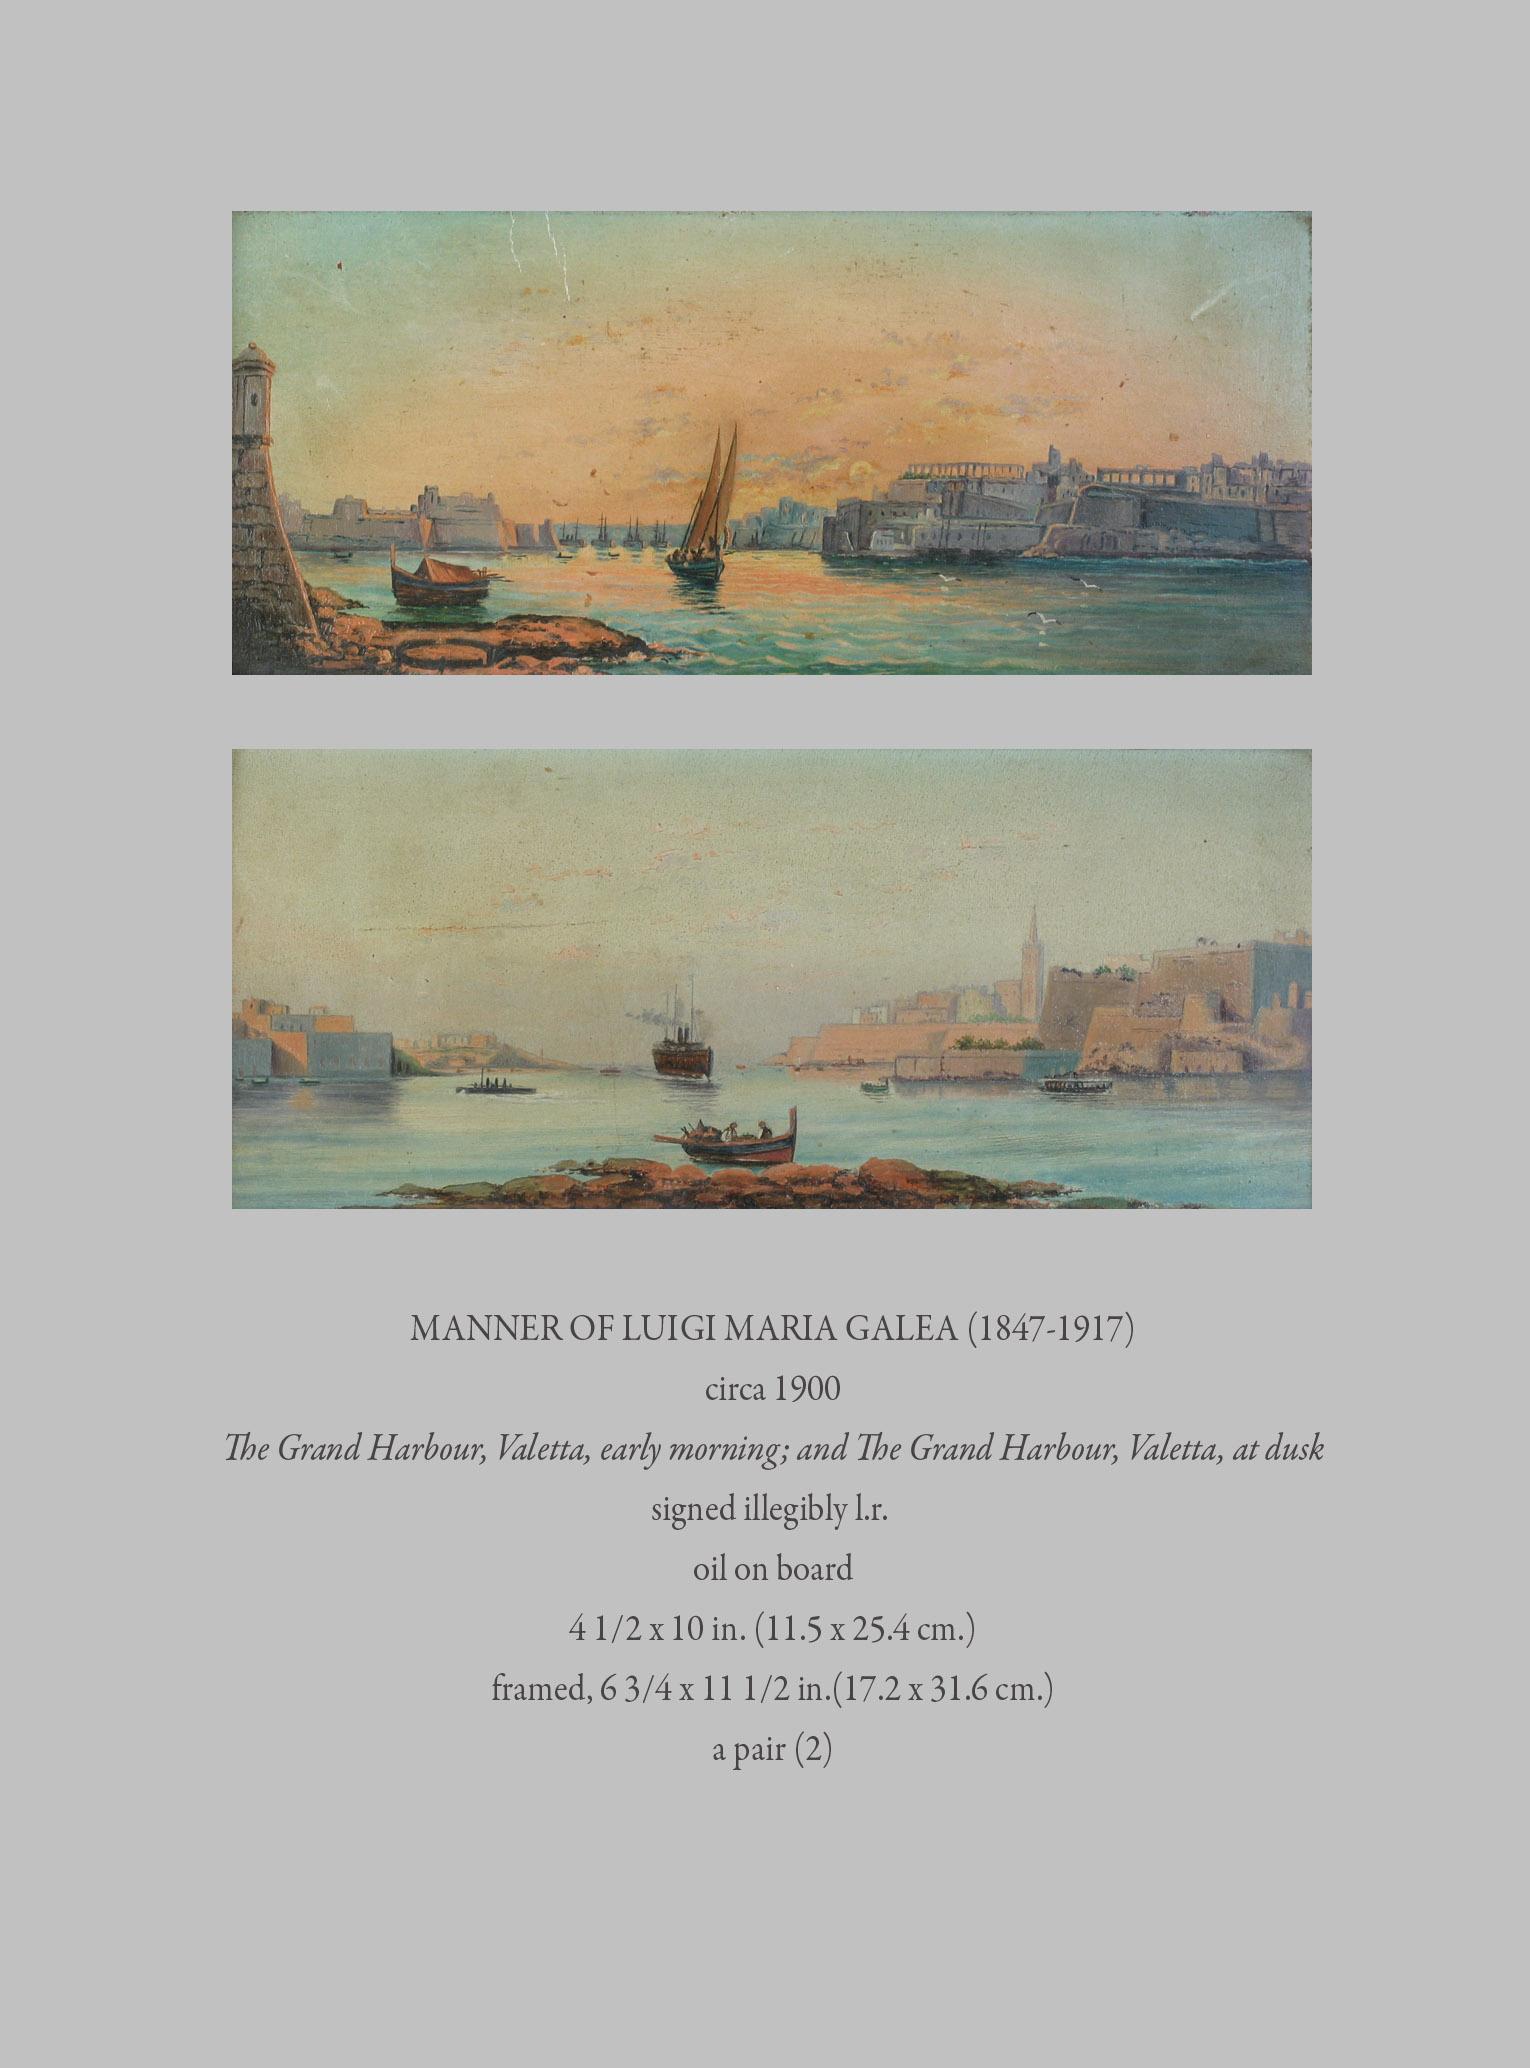 Manner Of Luigi Maria Galea (1847-1917)
circa 1900
The Grand Harbour, Valetta, early morning; and The Grand Harbour, Valetta, at dusk
signed illegibly l.r. 
oil on board
Measures: 4 1/2 x 10 in. (11.5 x 25.4 cm.)
framed, 6 3/4 x 11 1/2